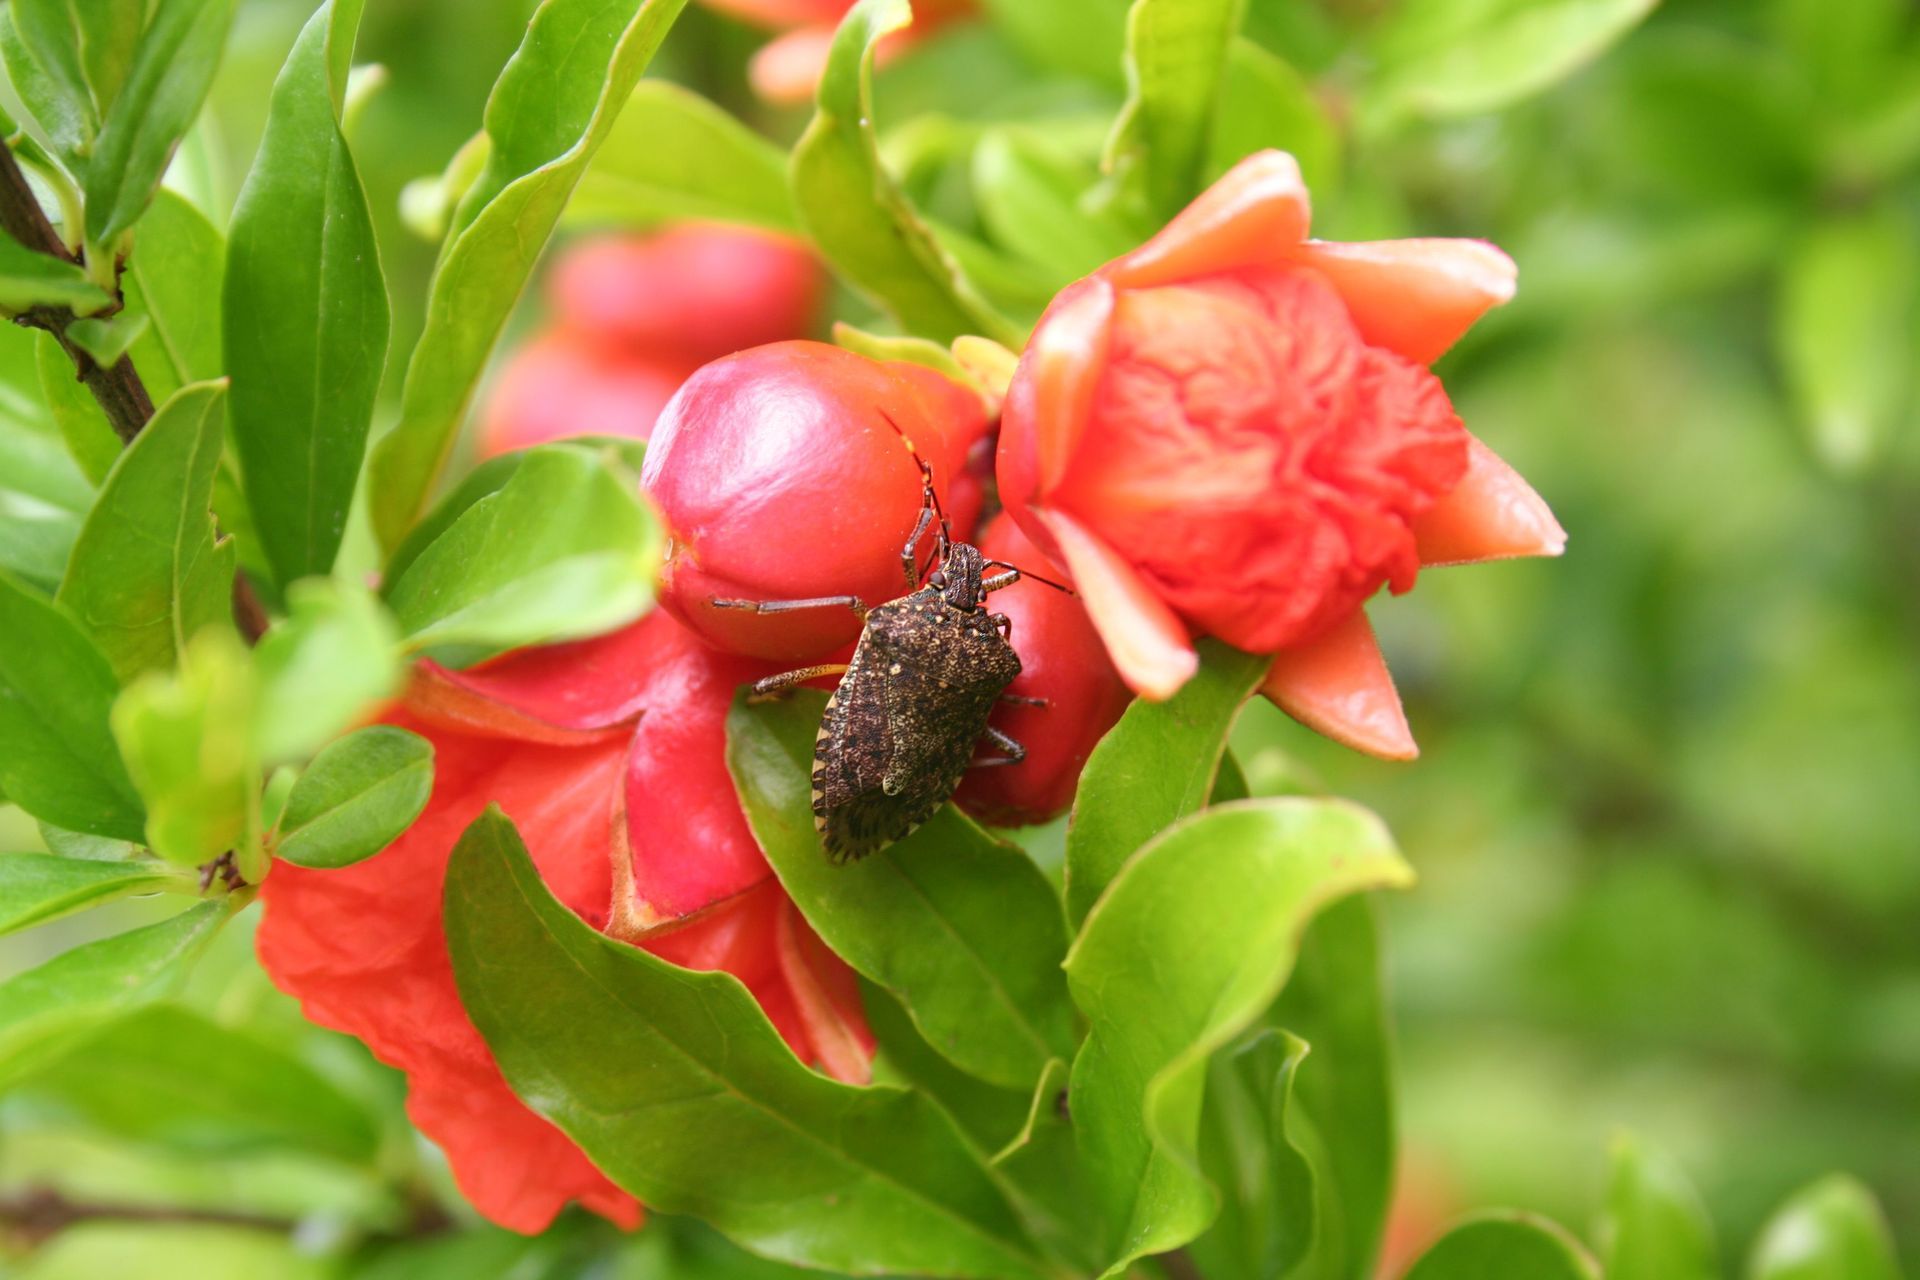 image of a stink bug attracted to flowers